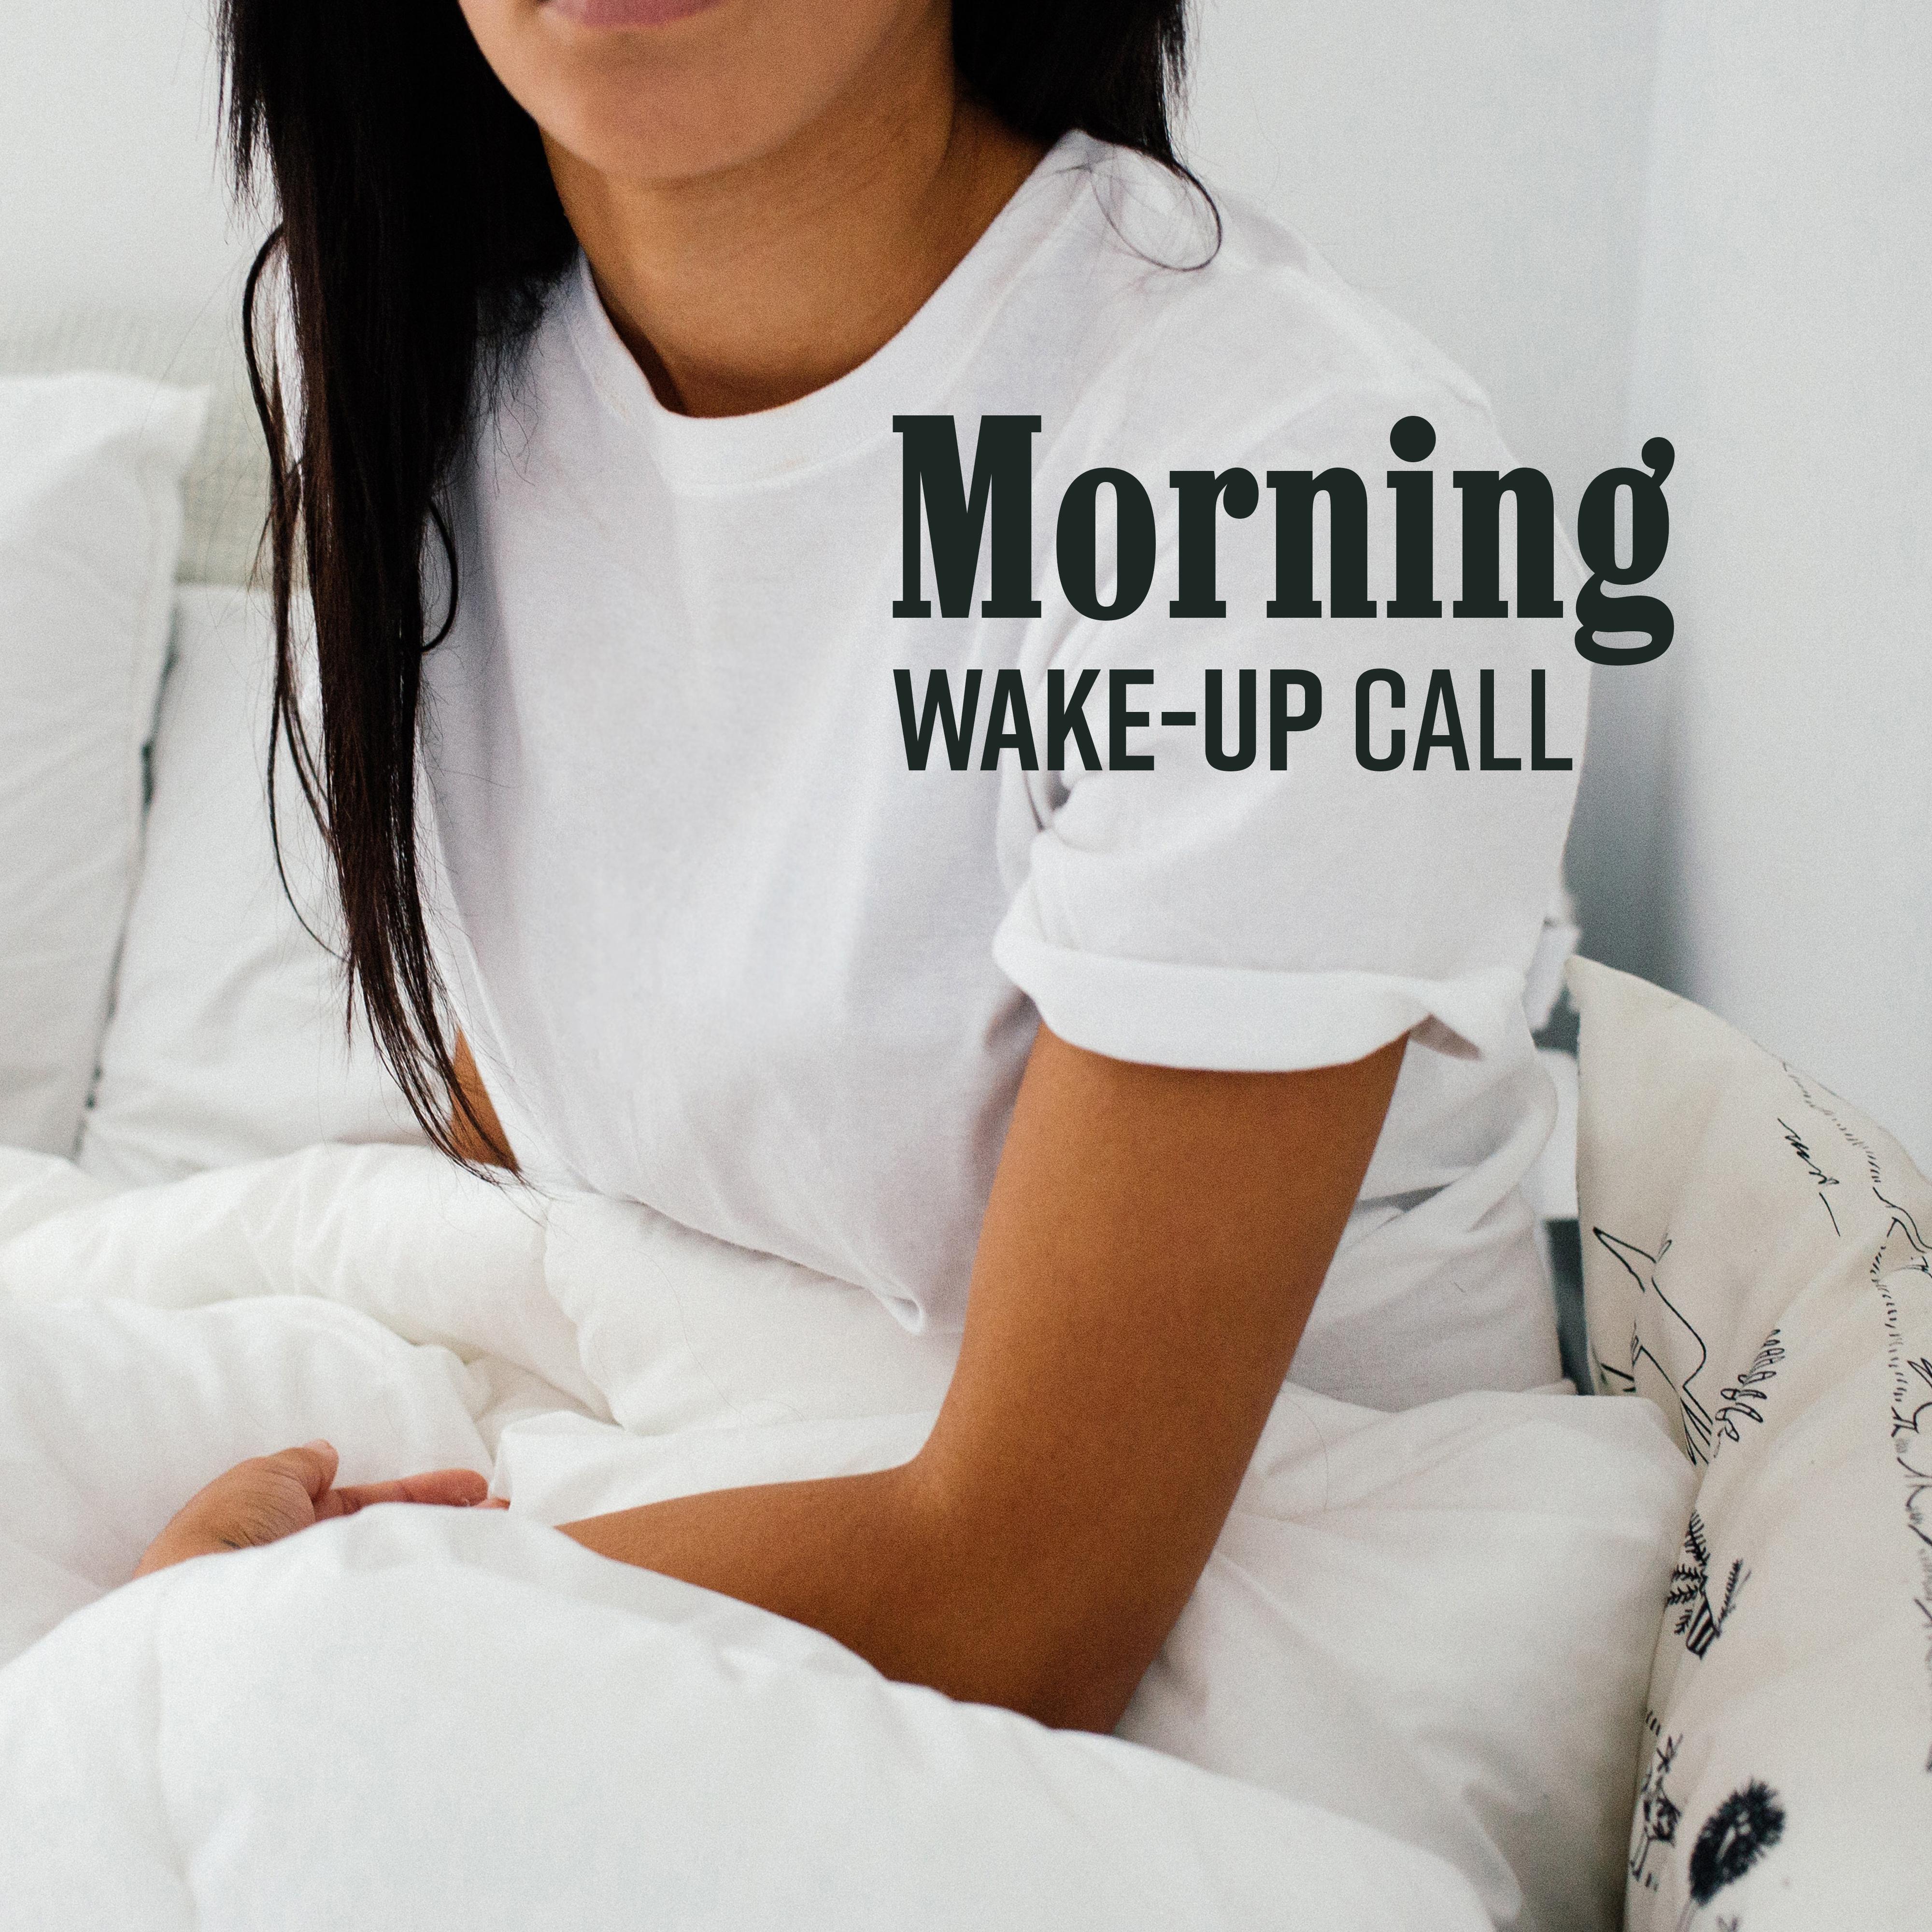 Morning Wake-Up Call: 15 Songs after Getting Up from Bed, for a Good Start of the Day, Music for Mornings, for Morning Coffee and Breakfast, for Relaxation before Work, for Lazing at the Weekend